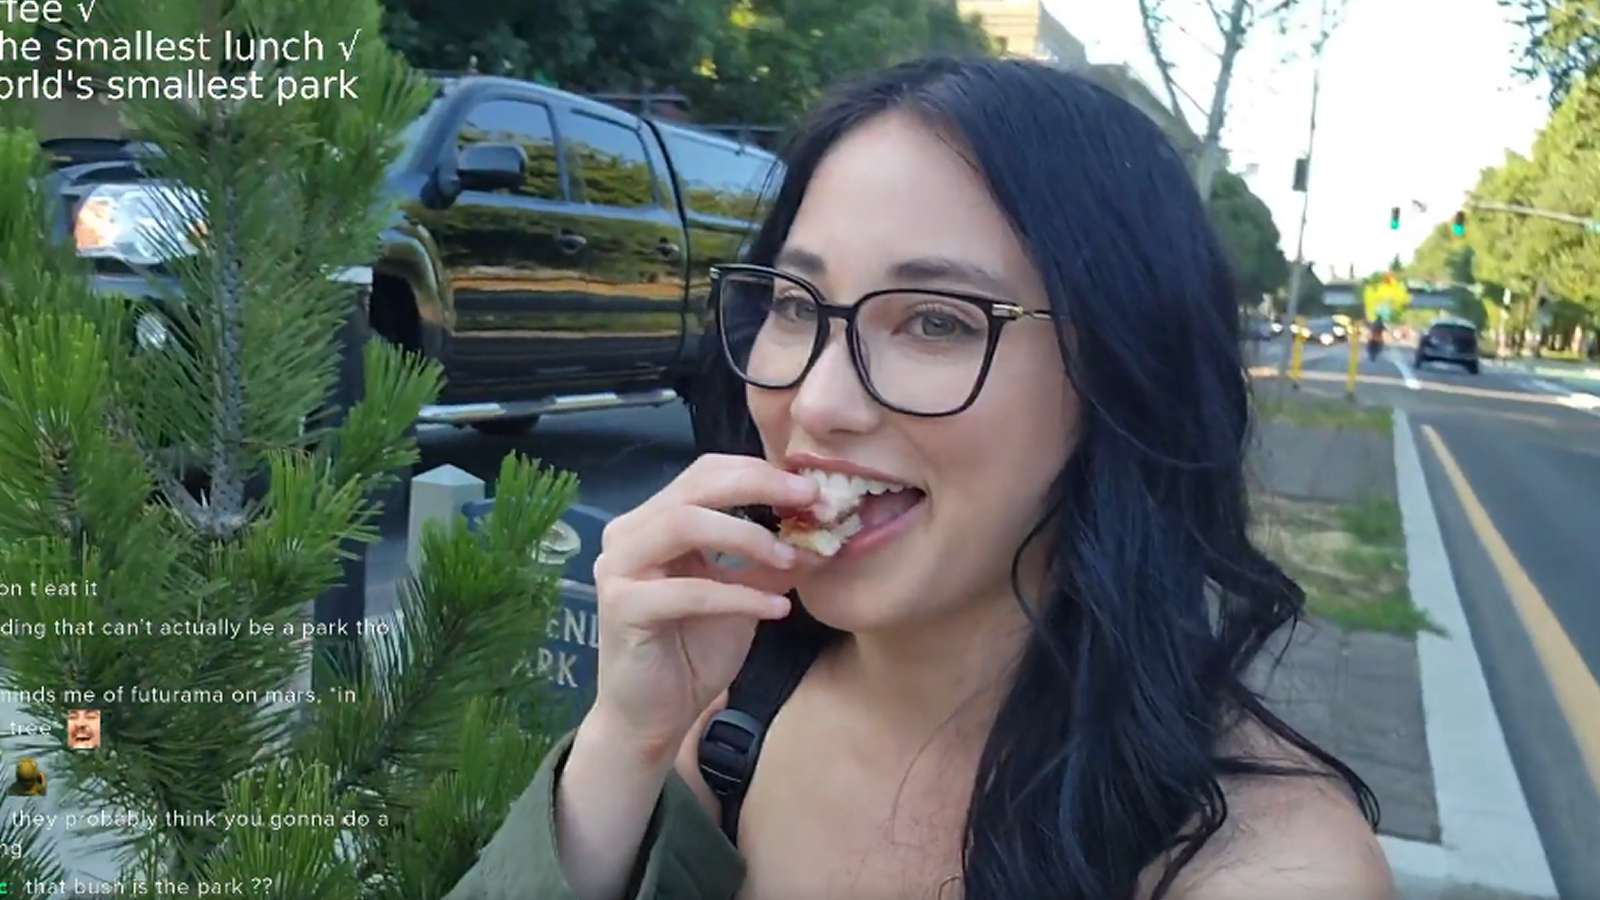 IRL Twitch streamer hilariously brings tiny lunch to world’s smallest park